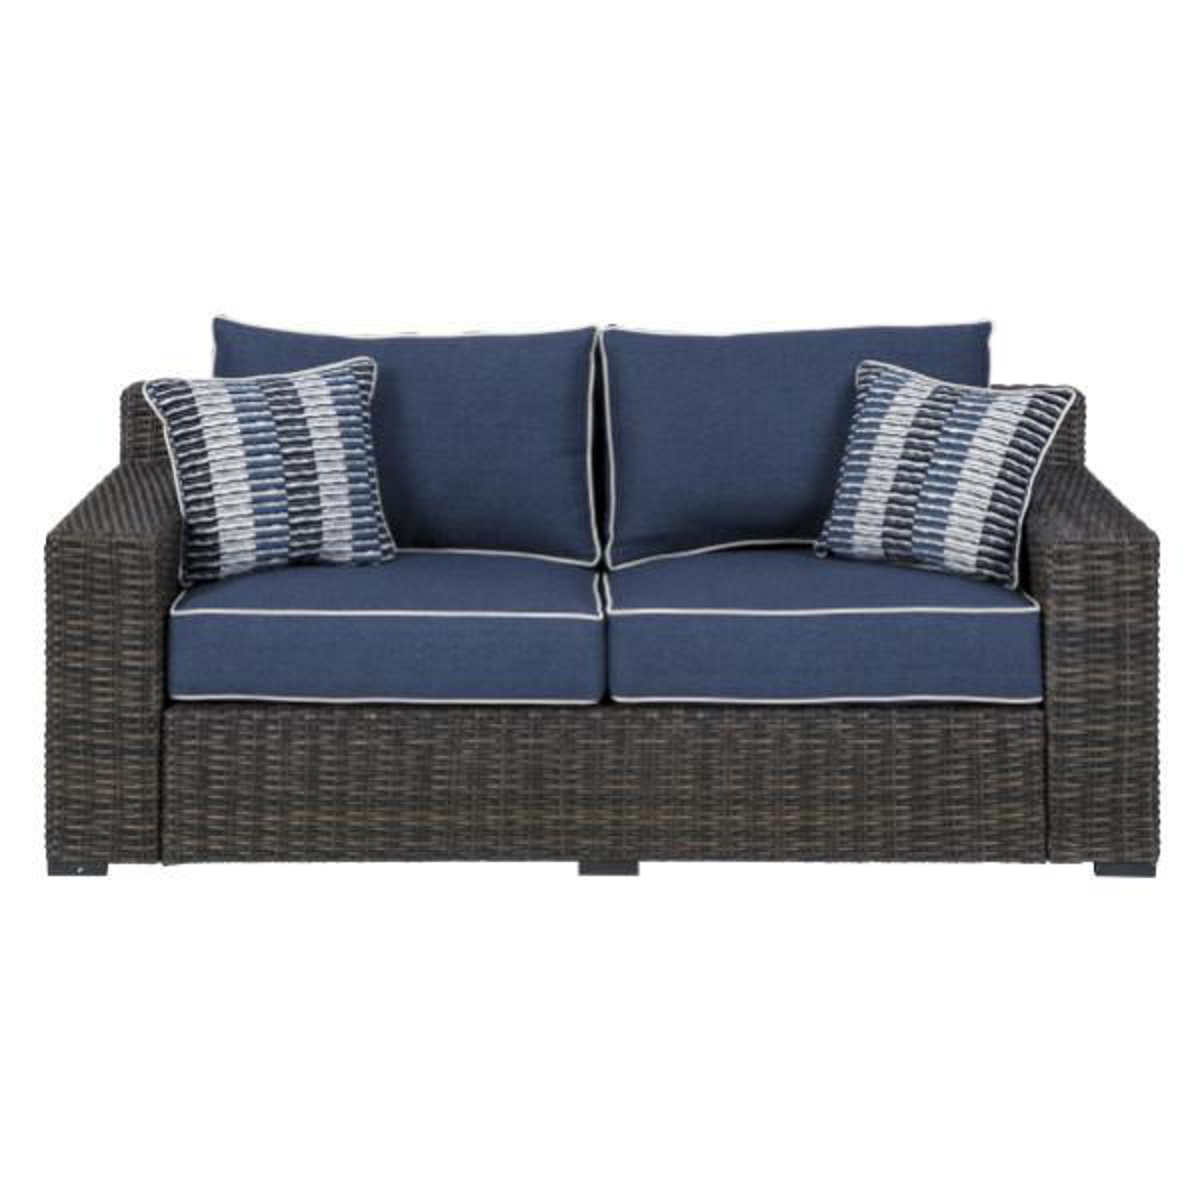 Picture of SEASIDE LOVESEAT W/CUSHION